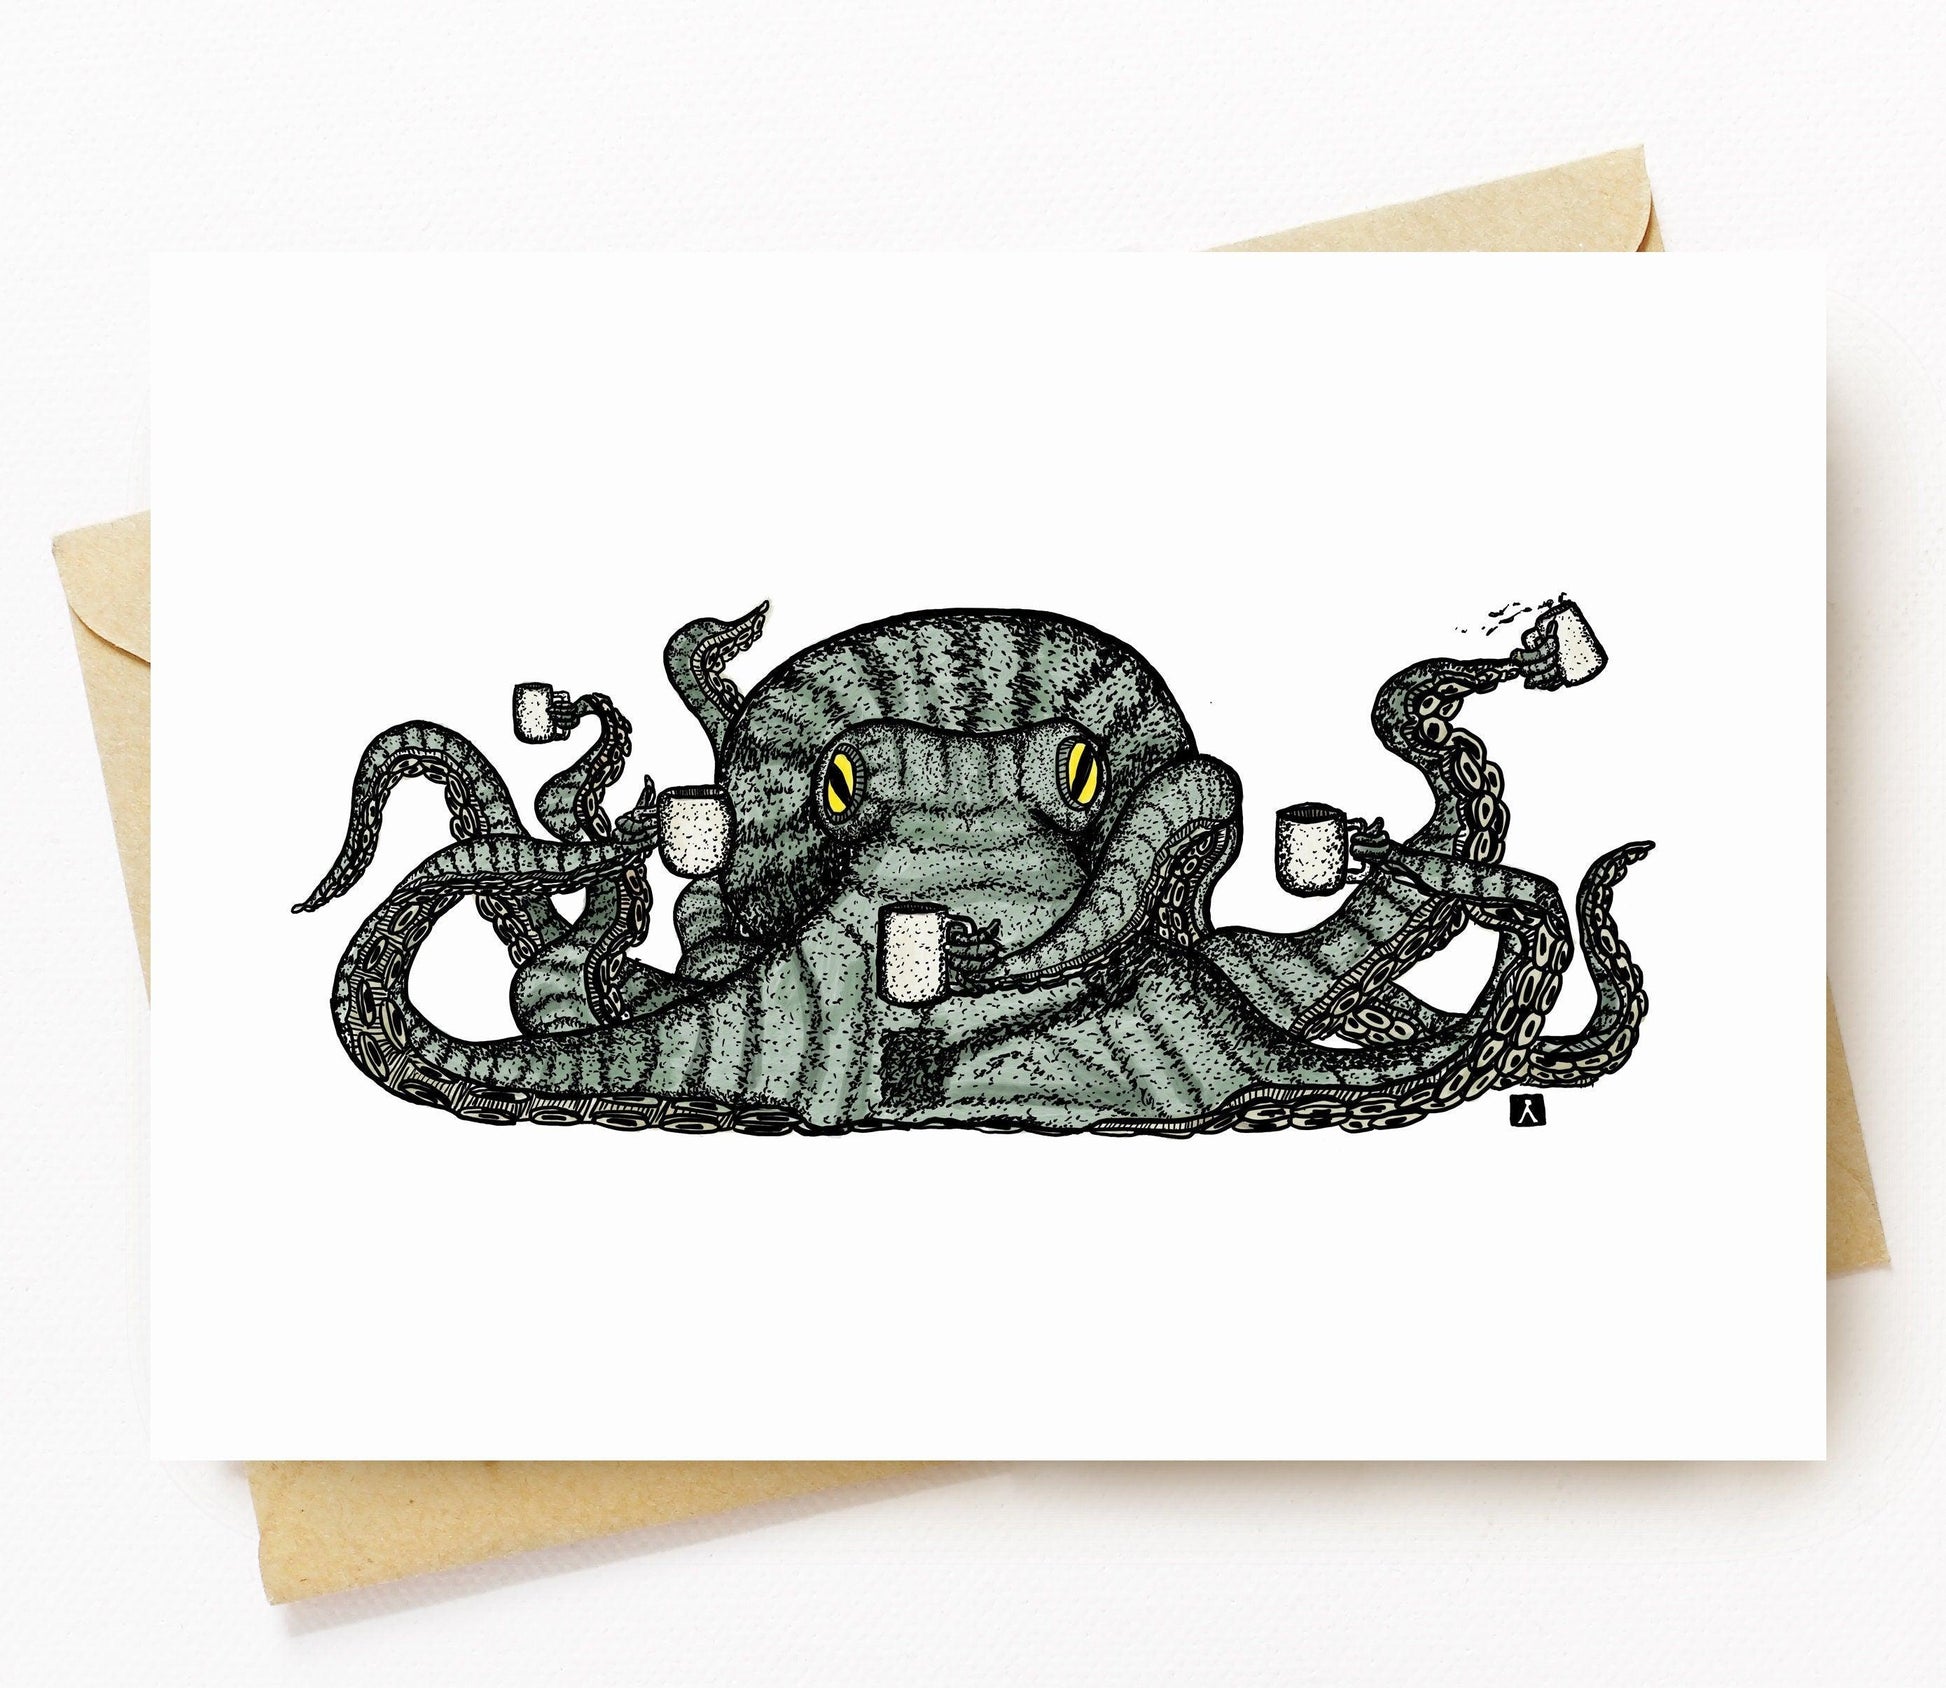 BellavanceInk: Greeting Card With Octopus With Multiple Cups Of Coffee 5 x 7 Inches - BellavanceInk